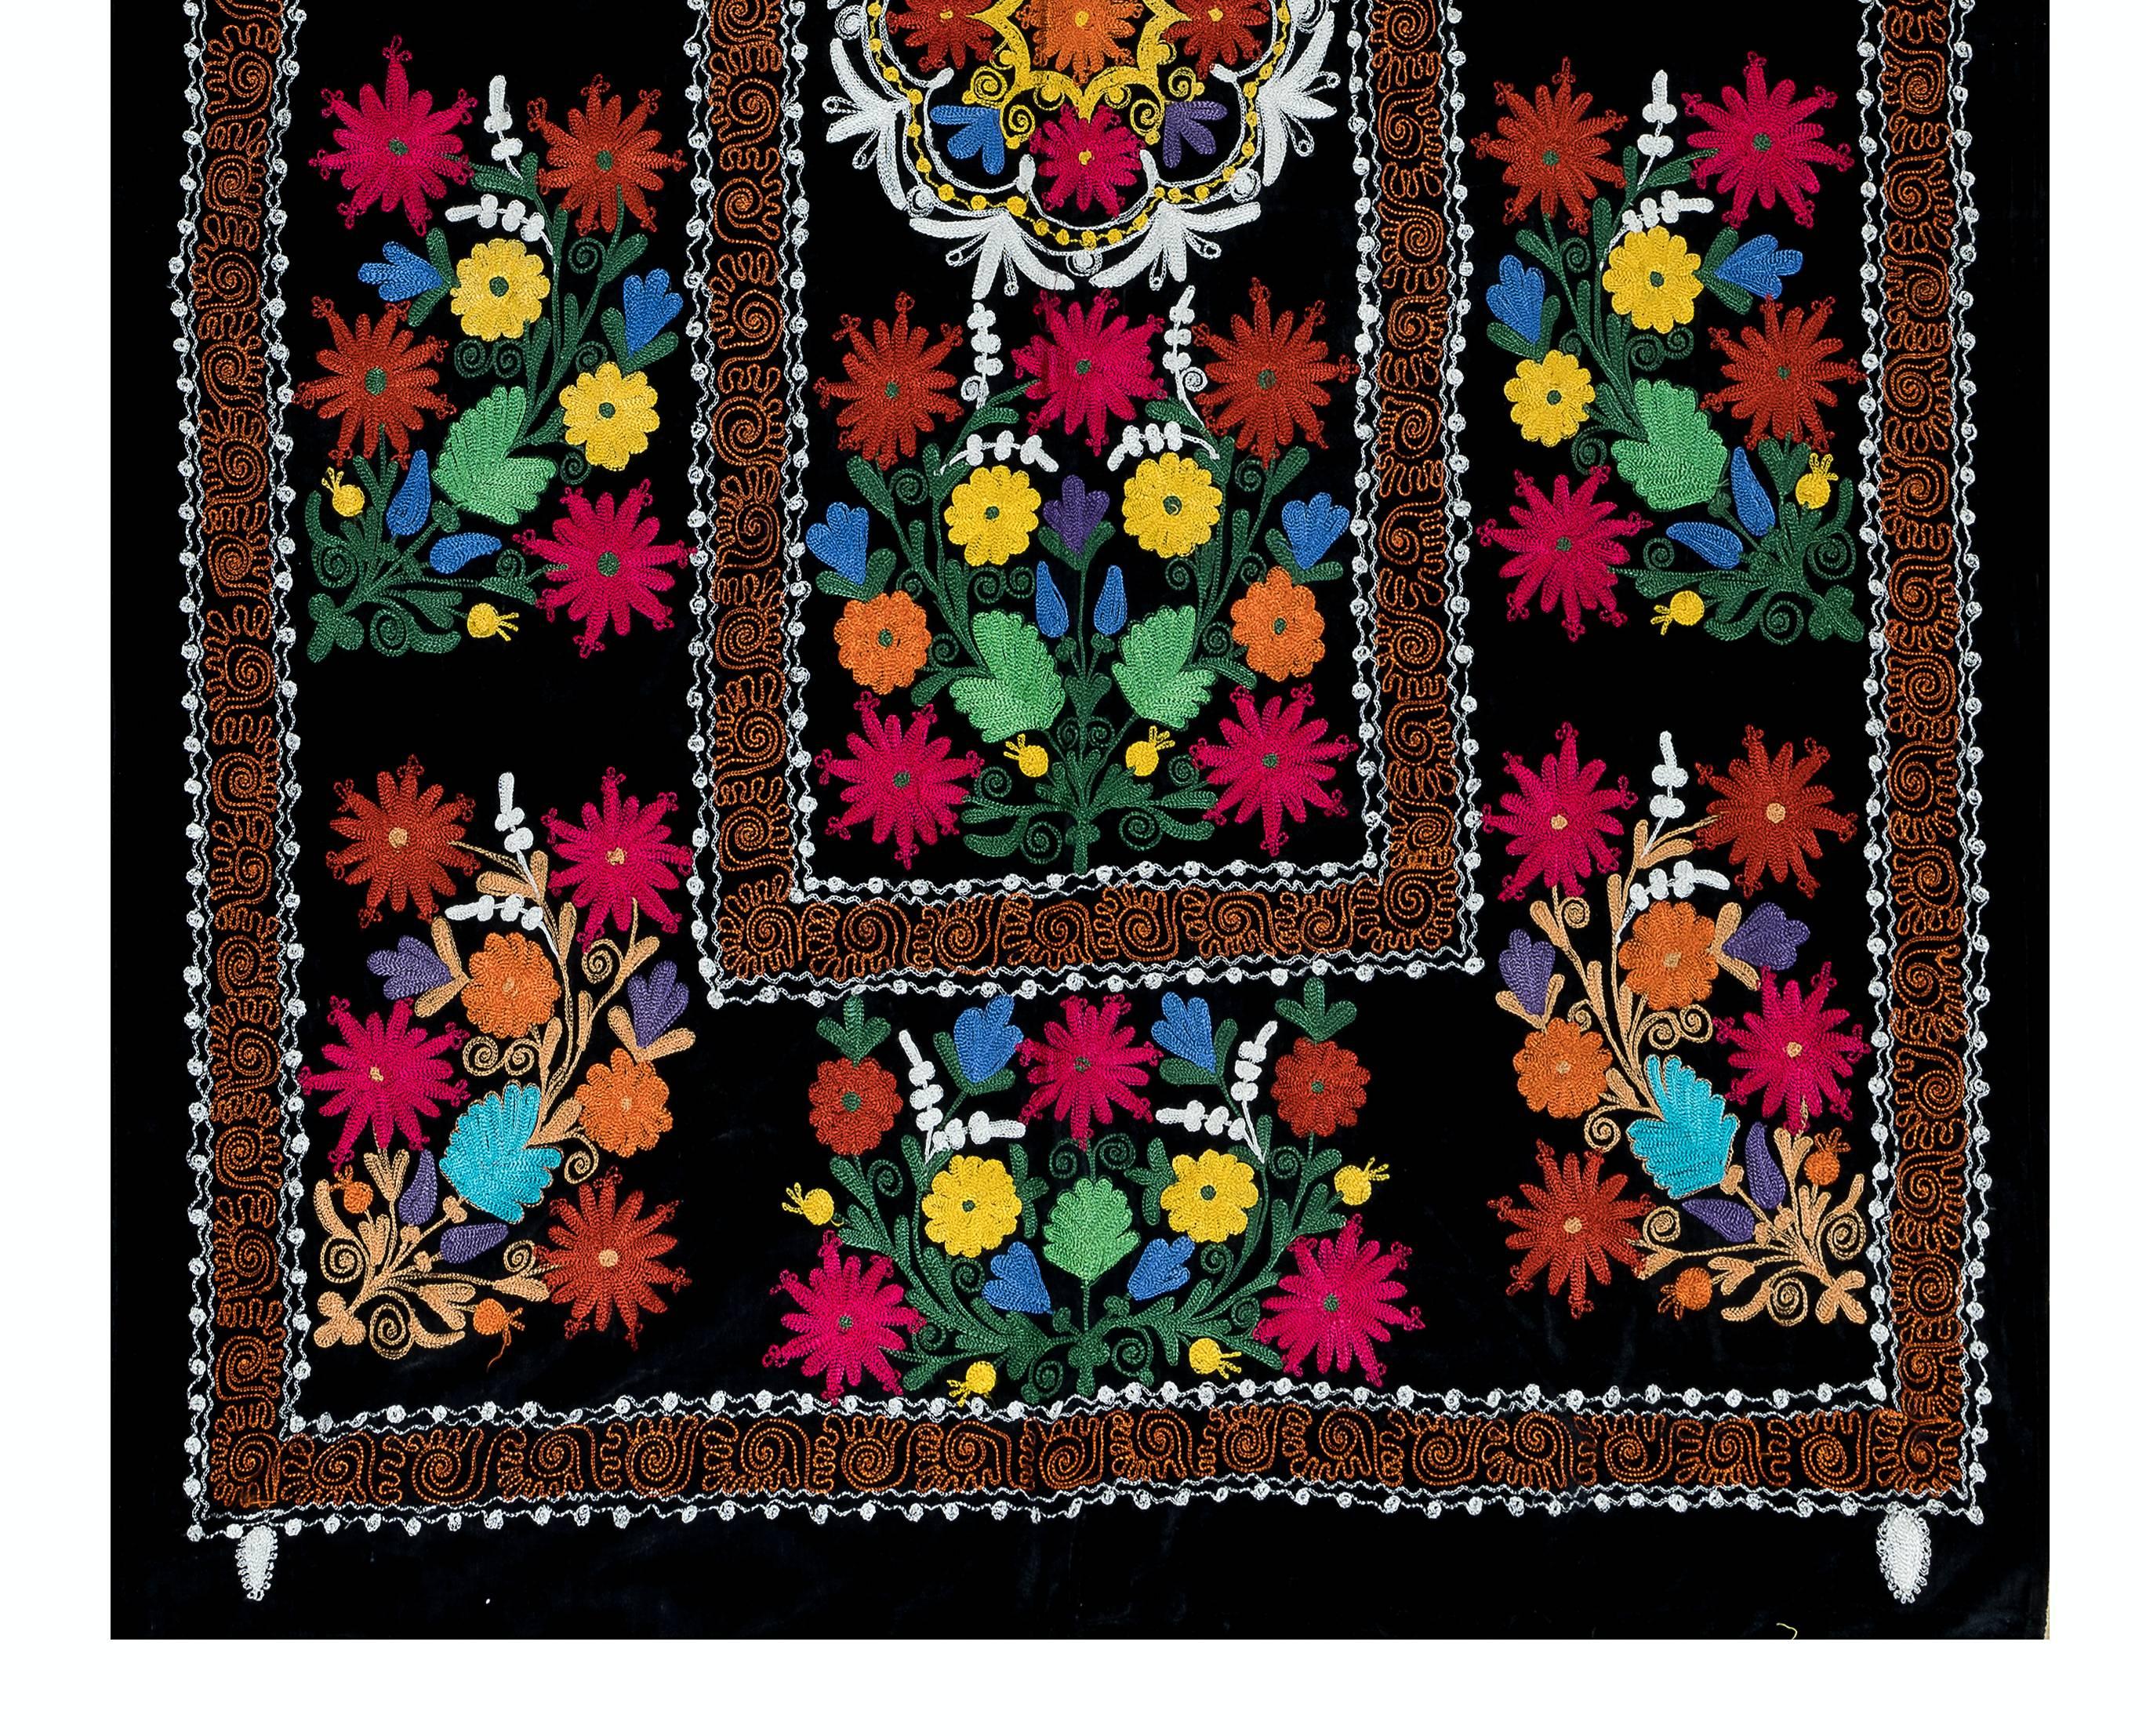 Embroidered 4.2x6.6 Ft Decorative Silk Hand Embroidery Suzani Wall Hanging from Uzbekistan For Sale